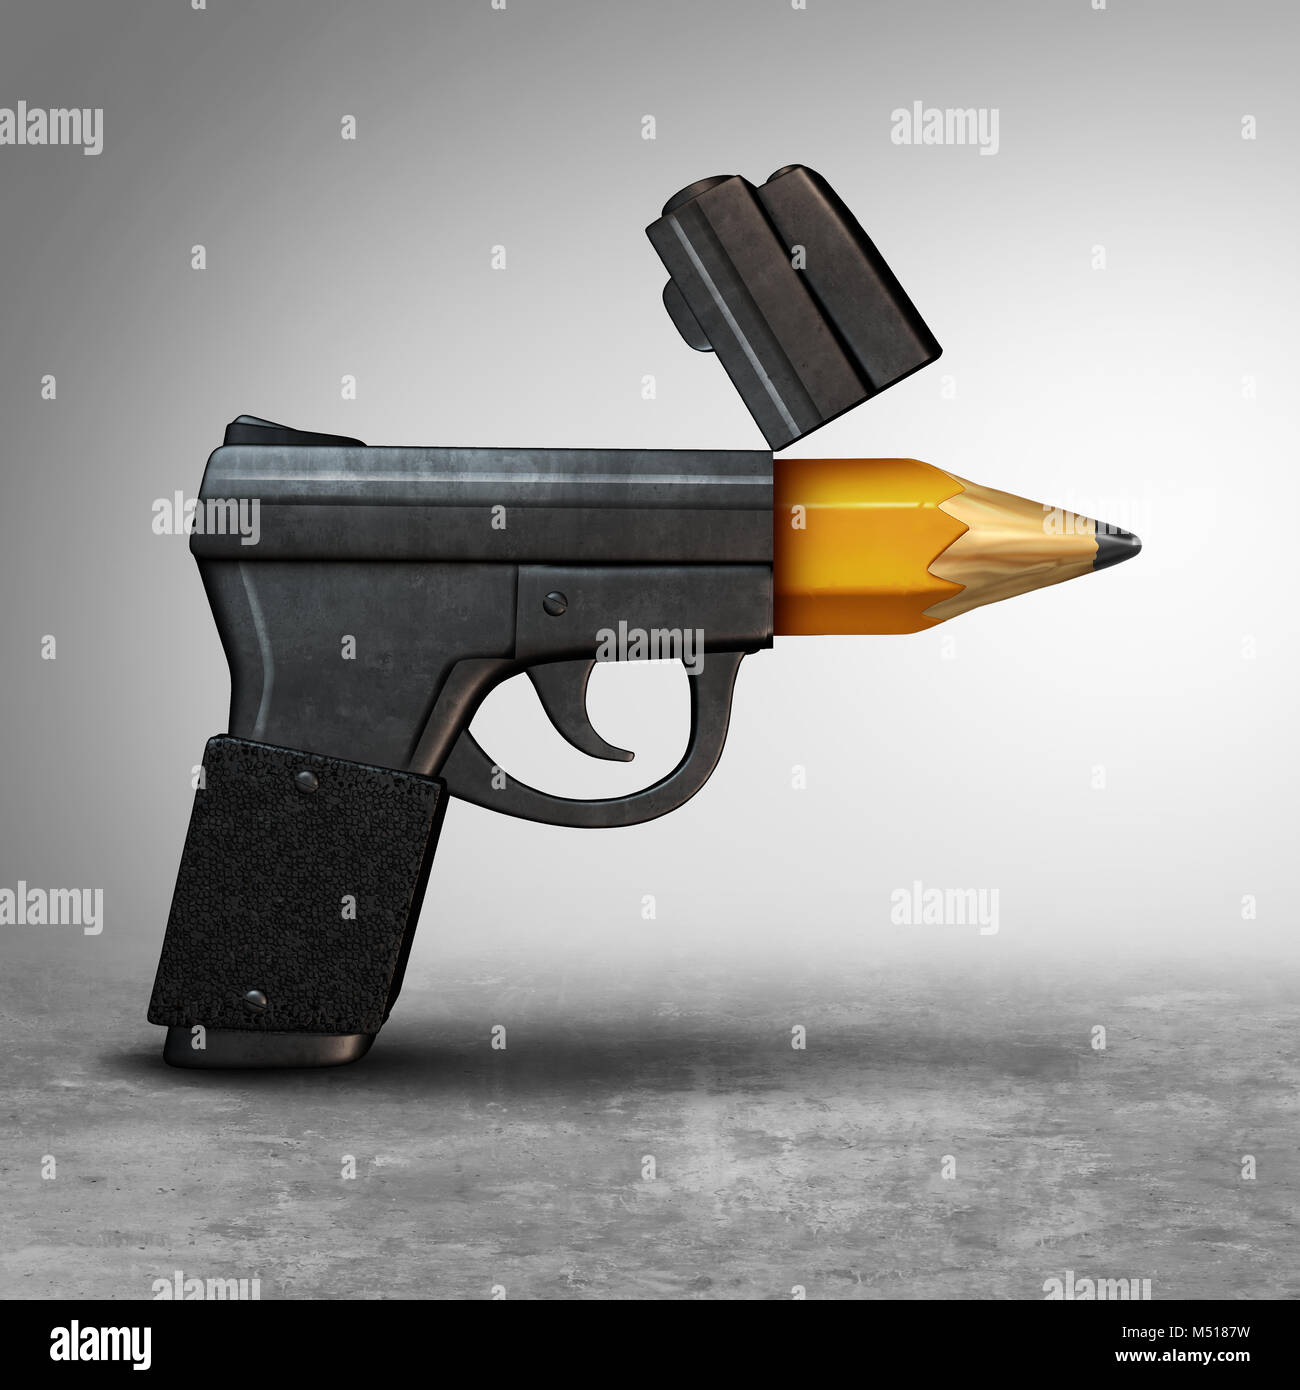 3,493 Starting Gun Images, Stock Photos, 3D objects, & Vectors